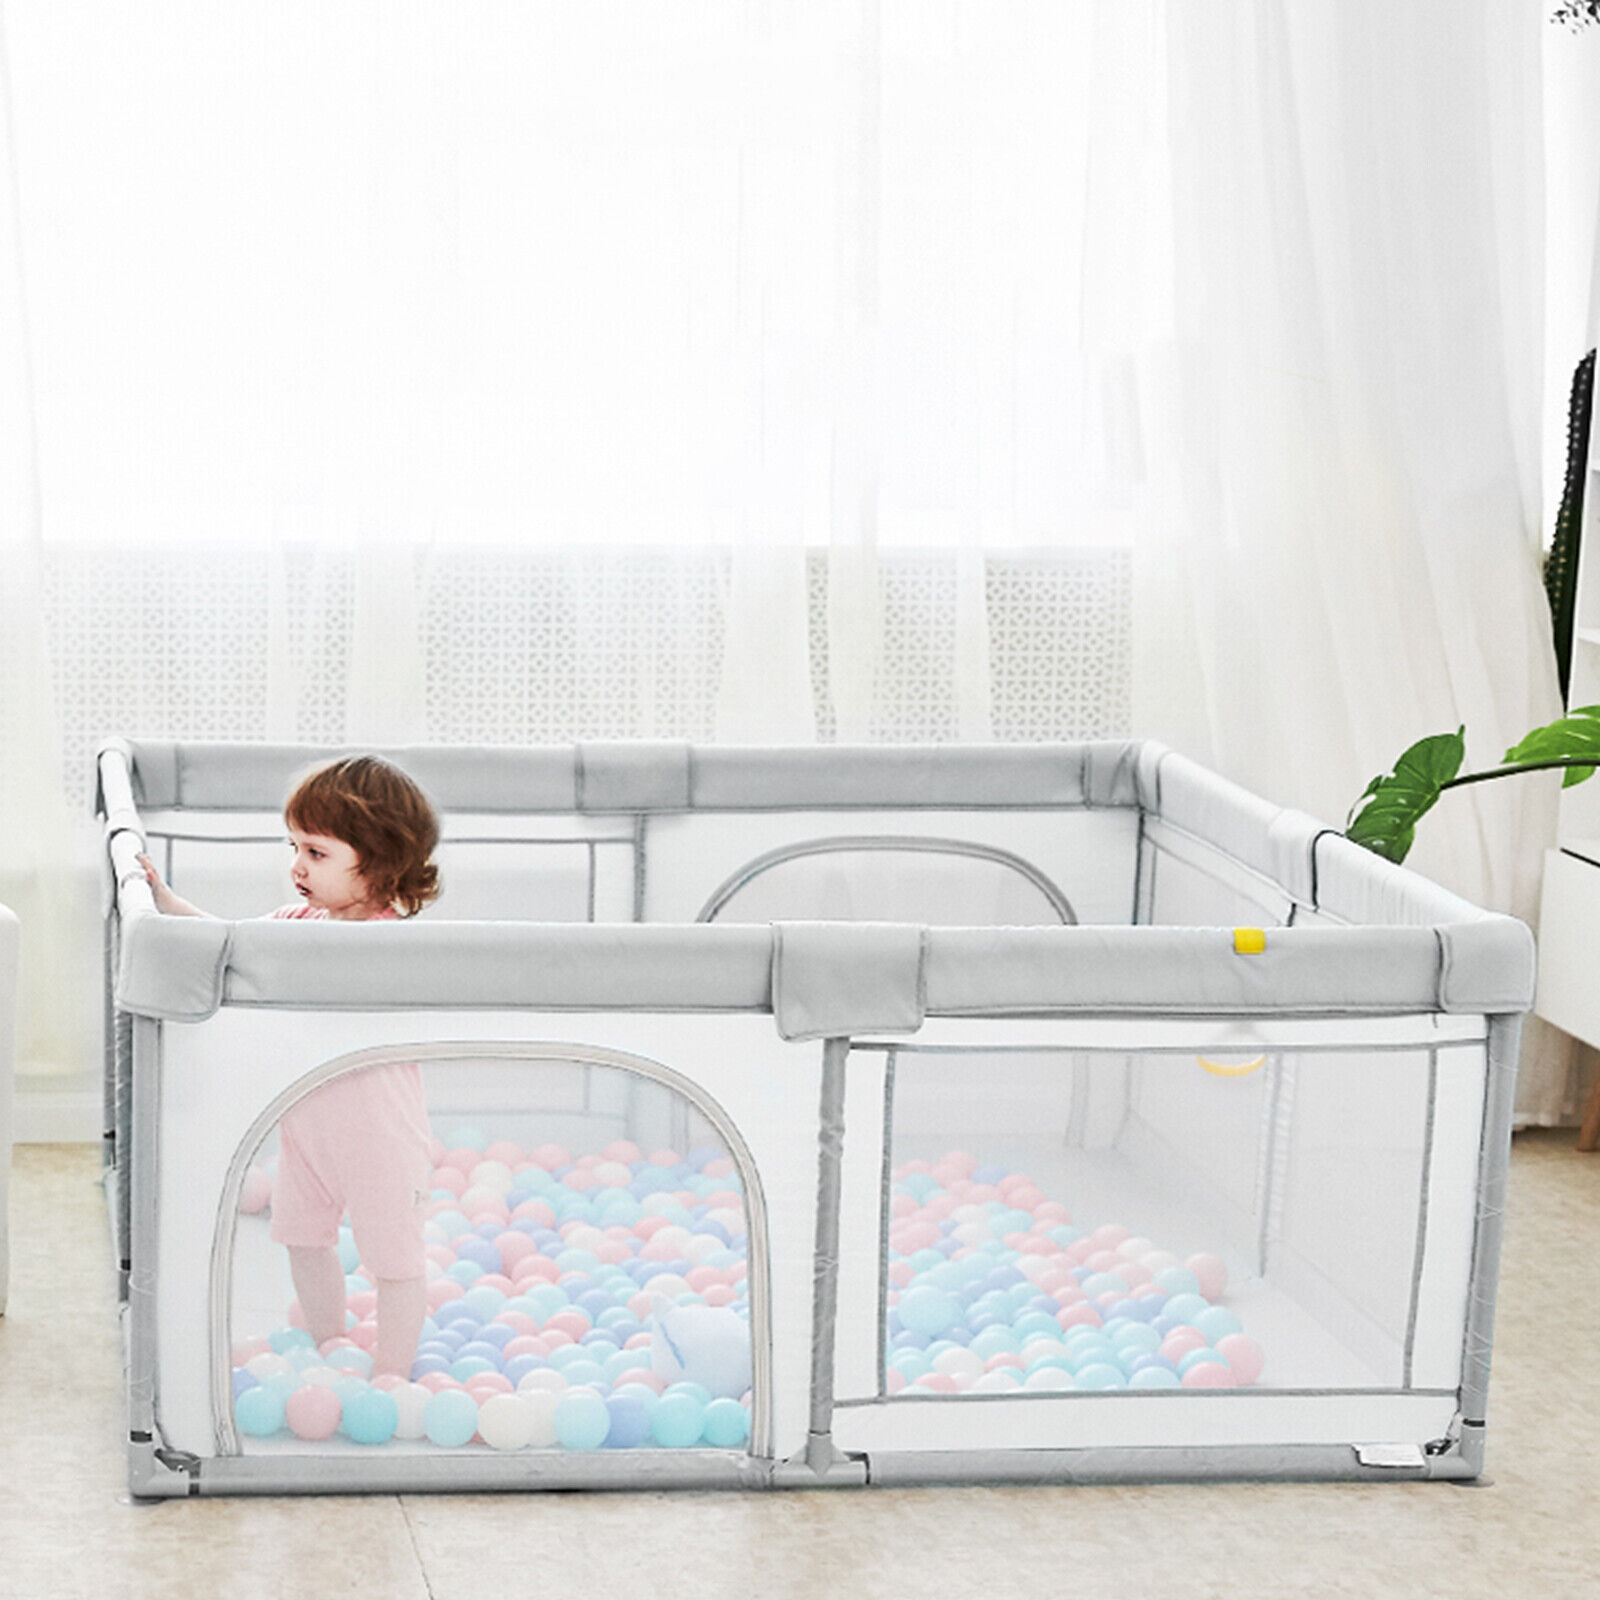 Animer and price revision Large Baby Safety Playpen Play Kids Yard Toddler Activity Luxury Center